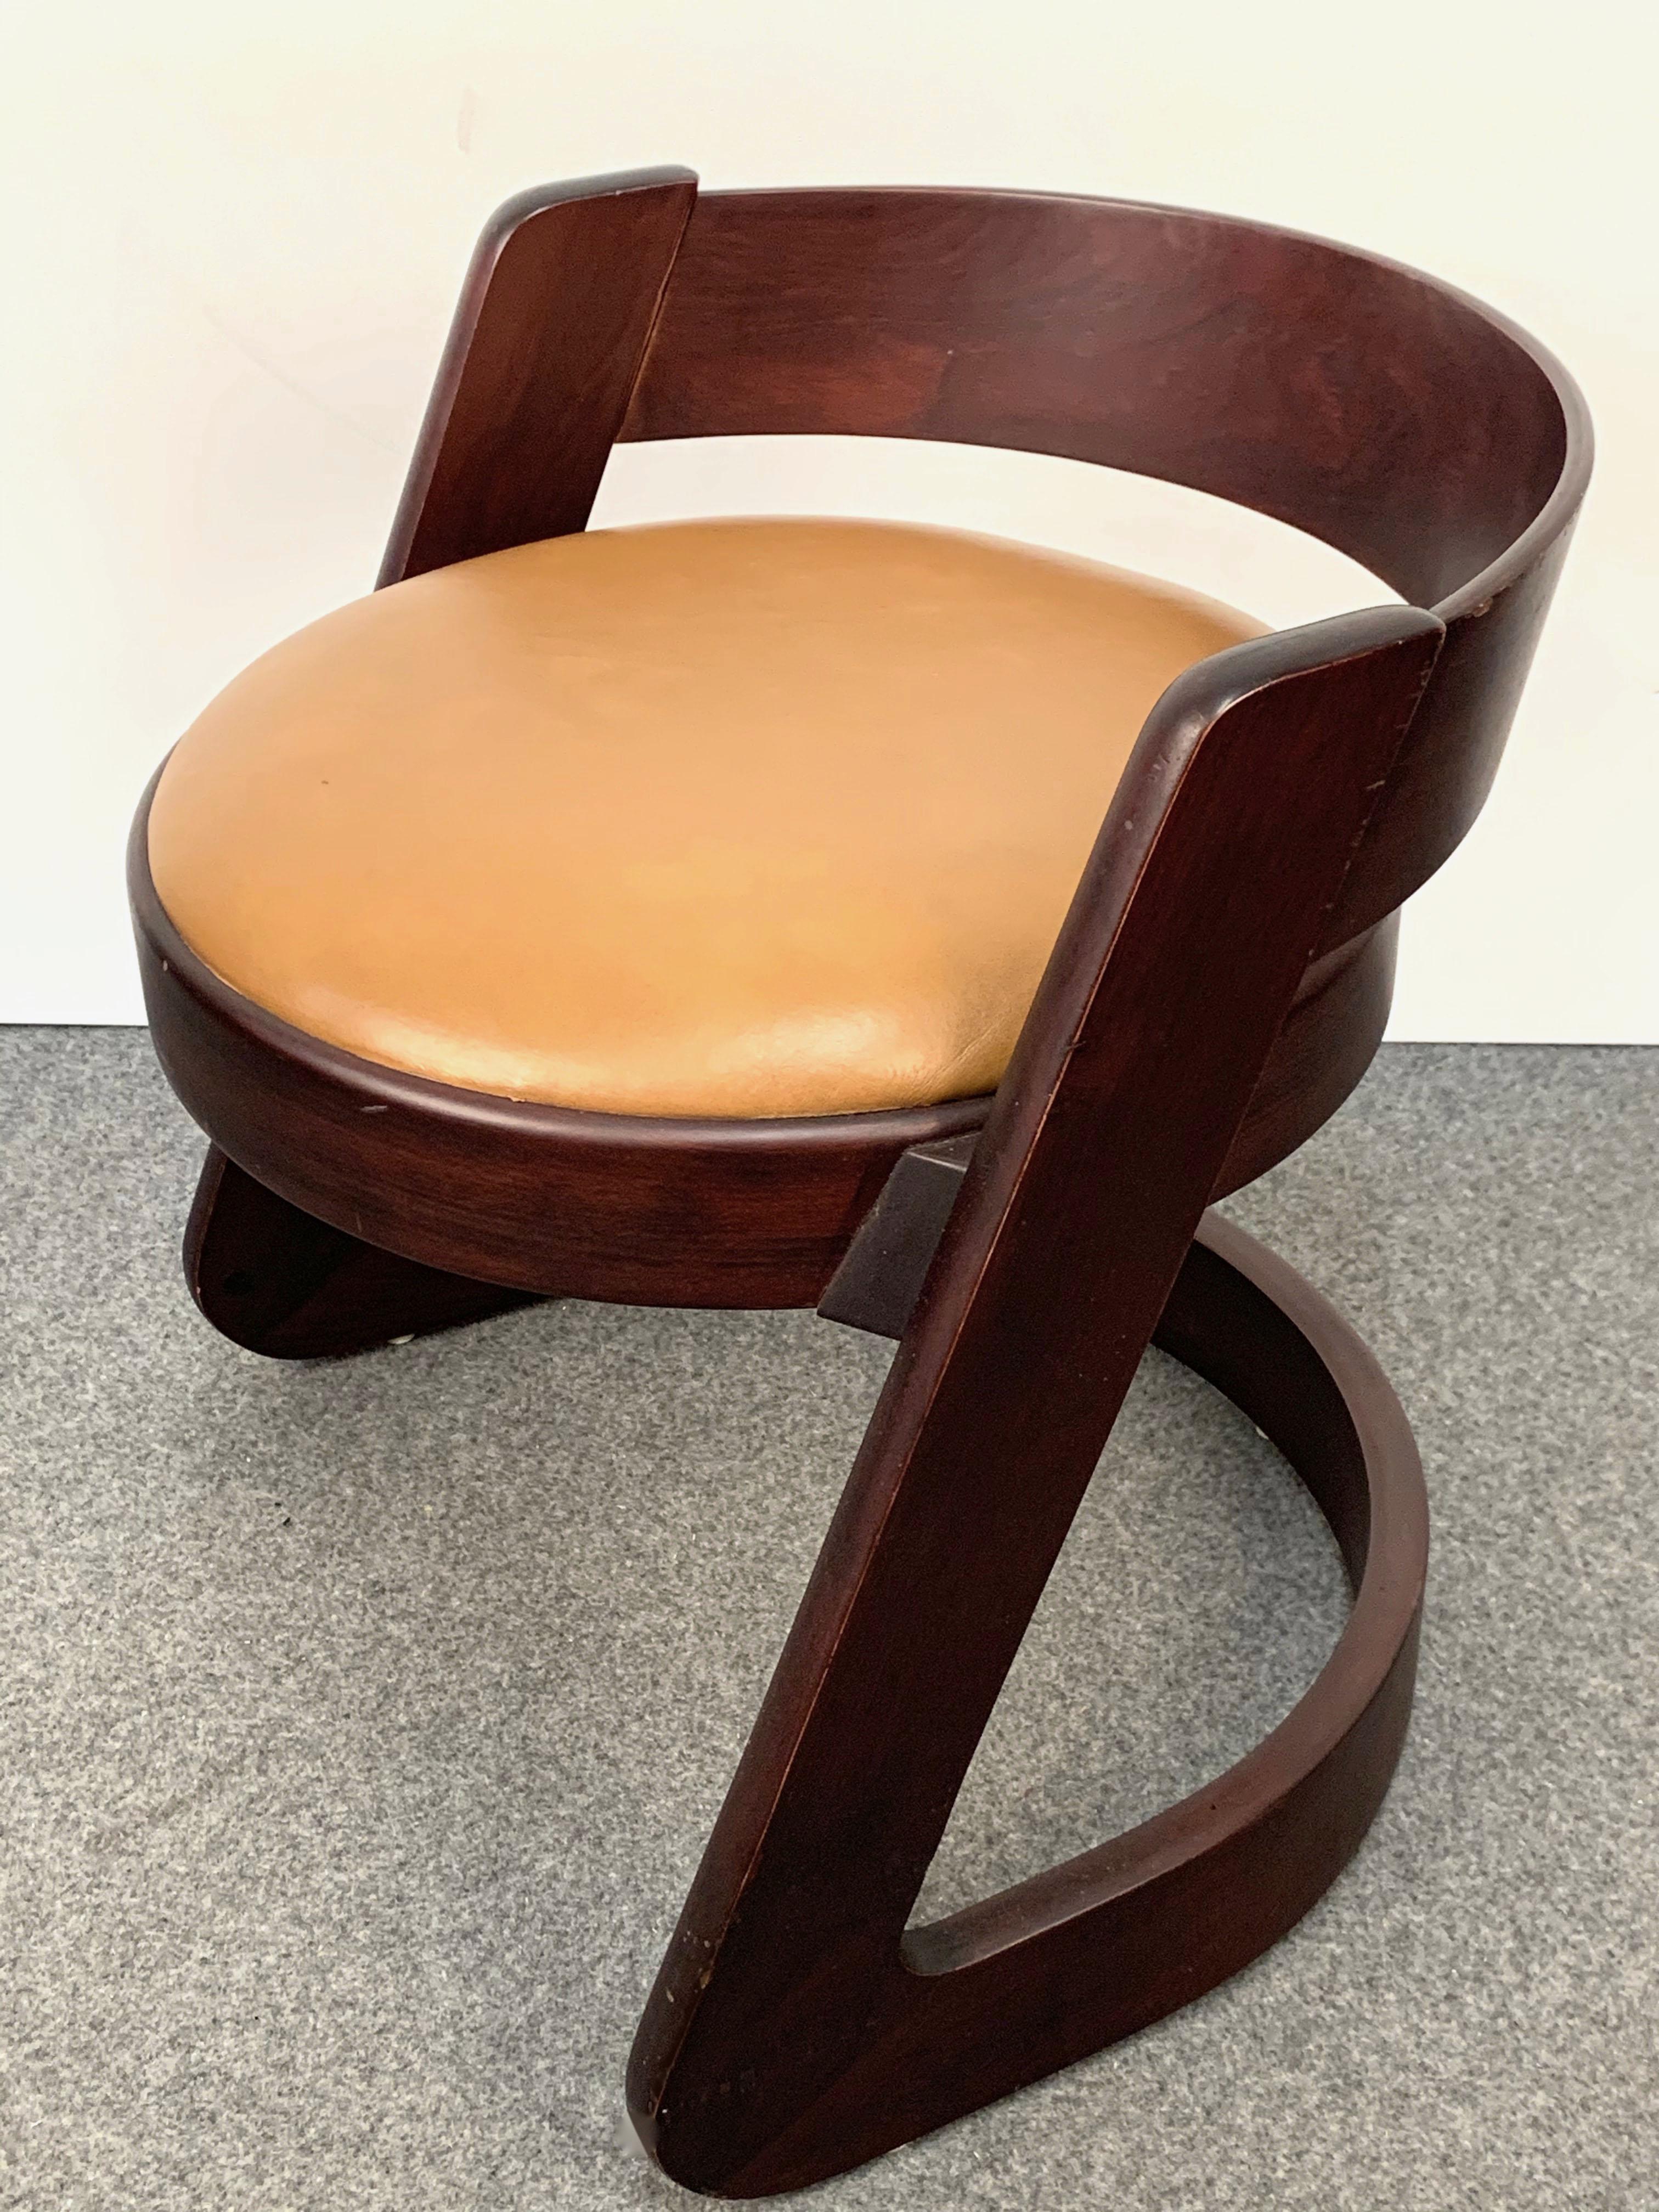 Mid-Century Modern Willy Rizzo Midcentury Italian Chair Wood and Leather for Mario Sabot, 1970s